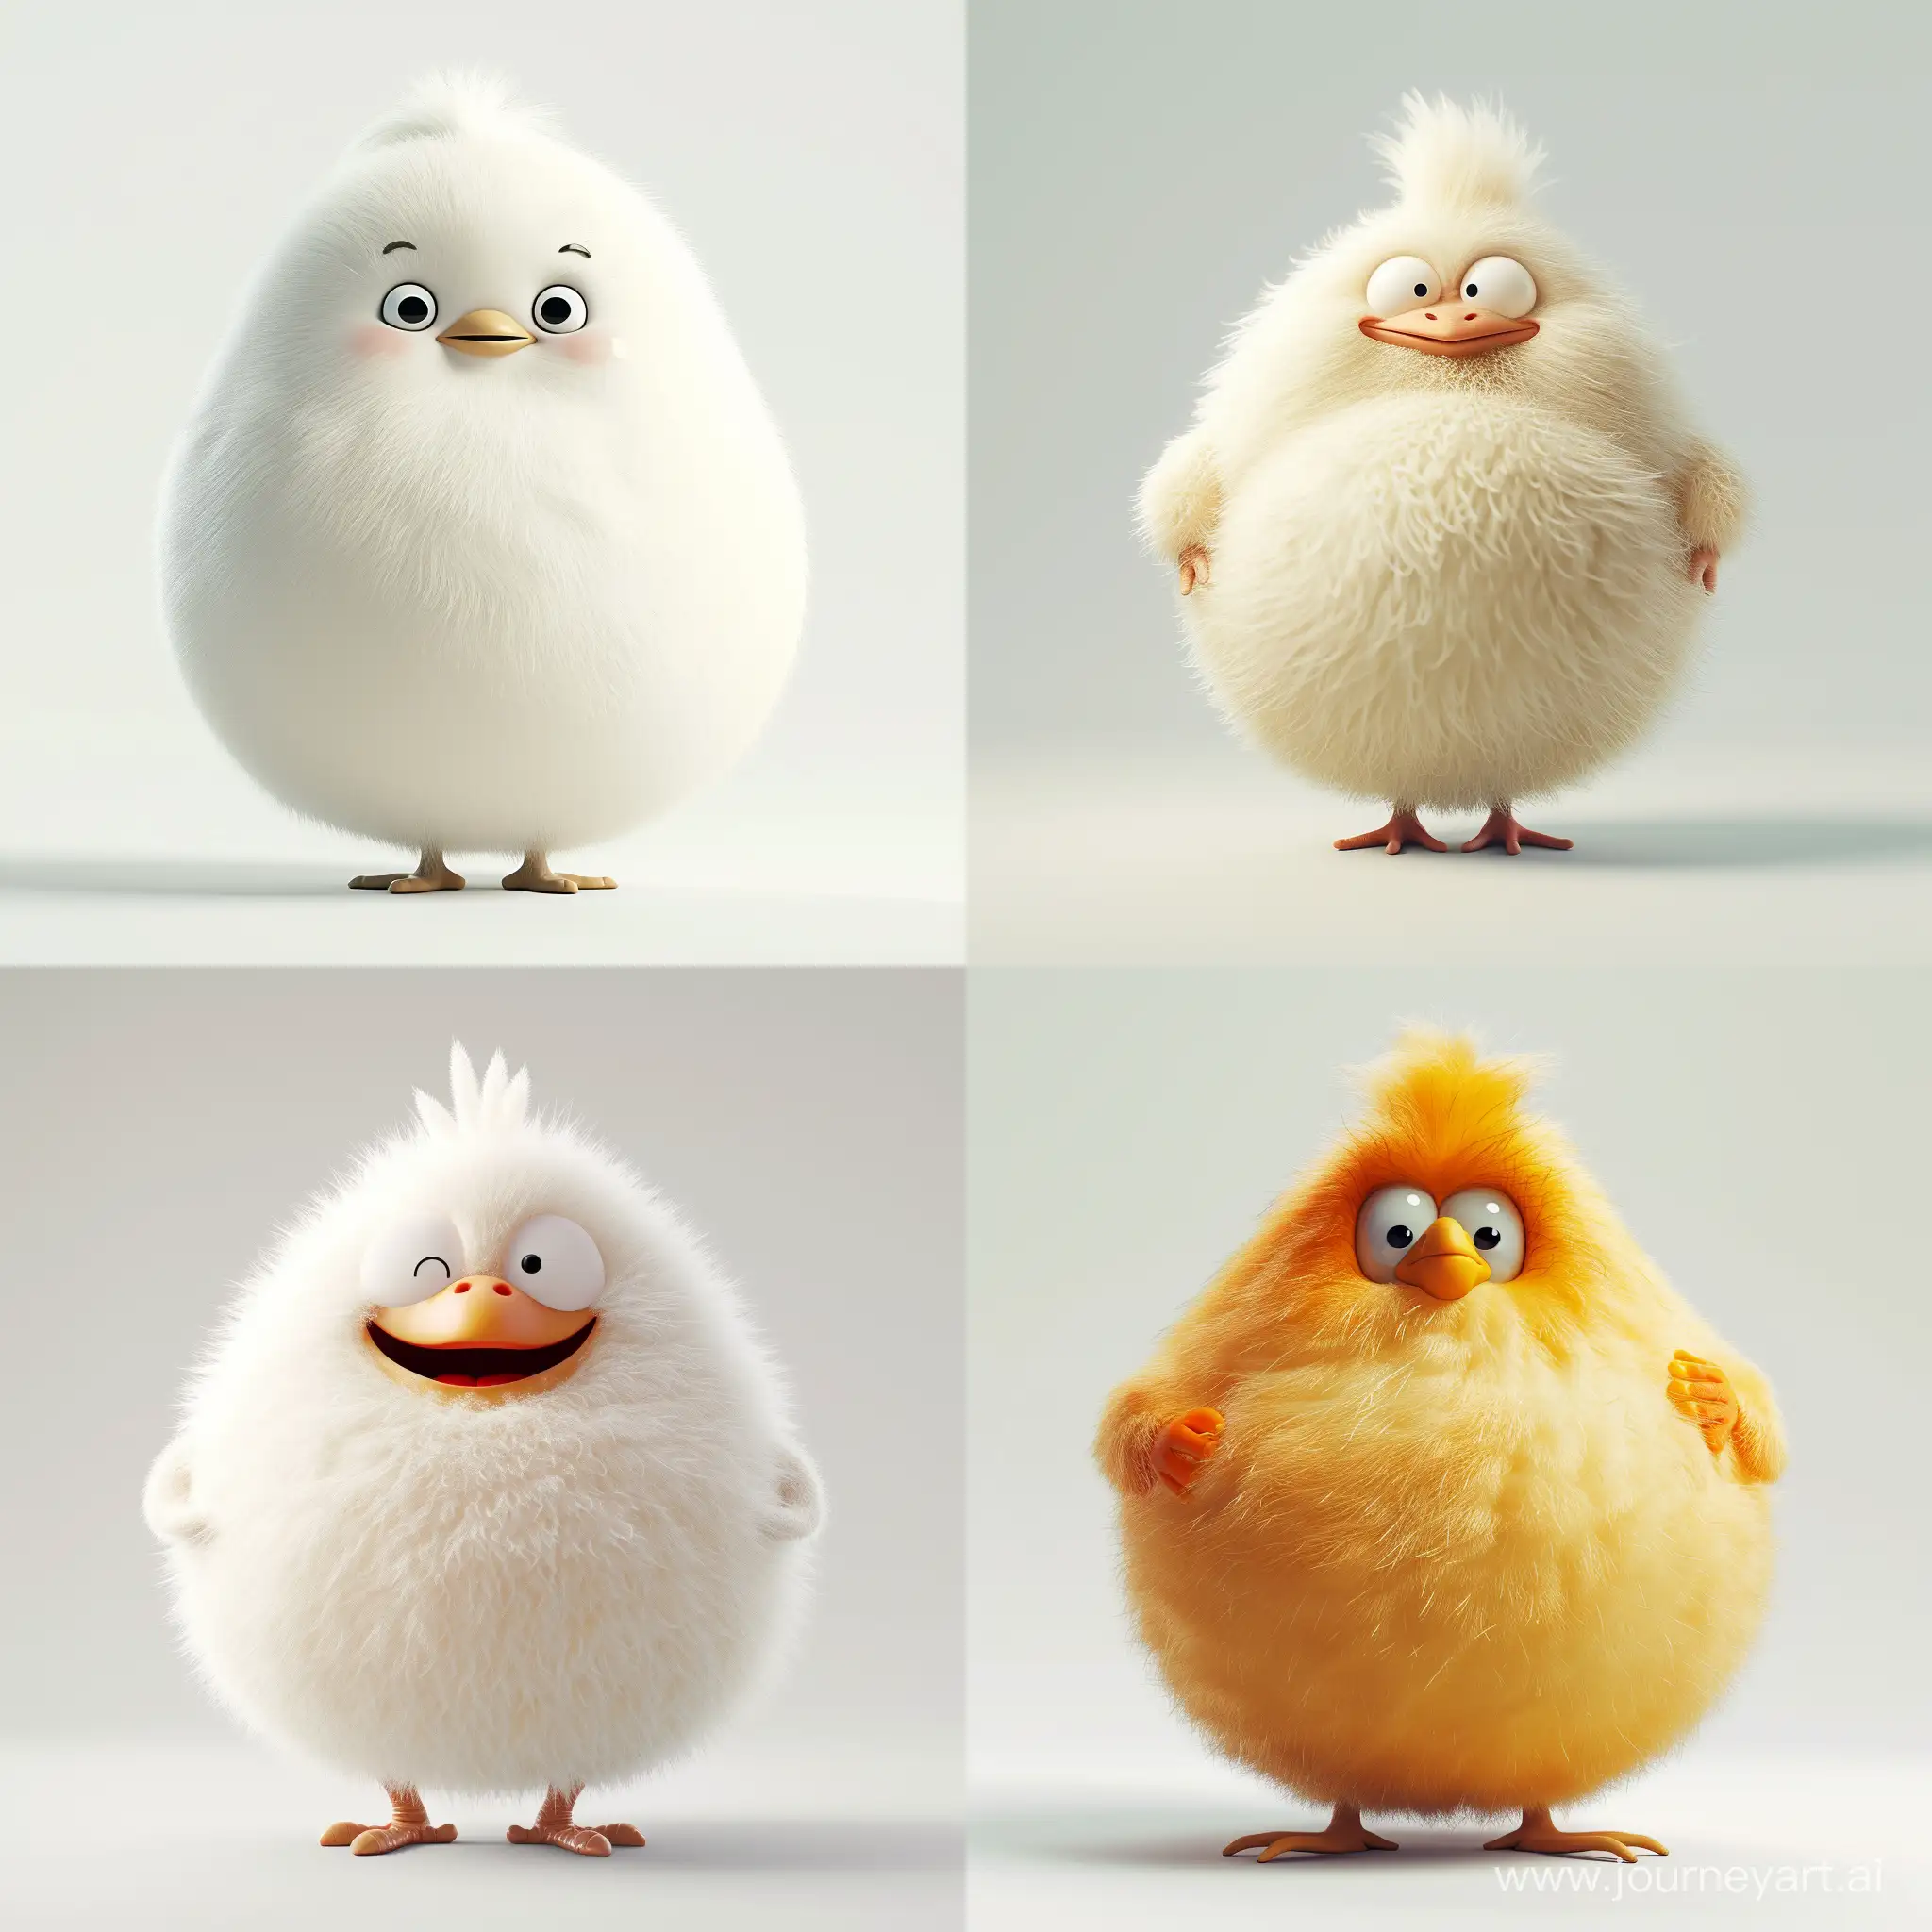 Chubby cute fluffy chicken belly, funny facial expression, exaggerated action, 3D character, white background, a bit fluffy, elongated shapes, cartoon style, minimalist - style original - chaos
12 - ar 3:4 - Stylized Original - Stylized 200